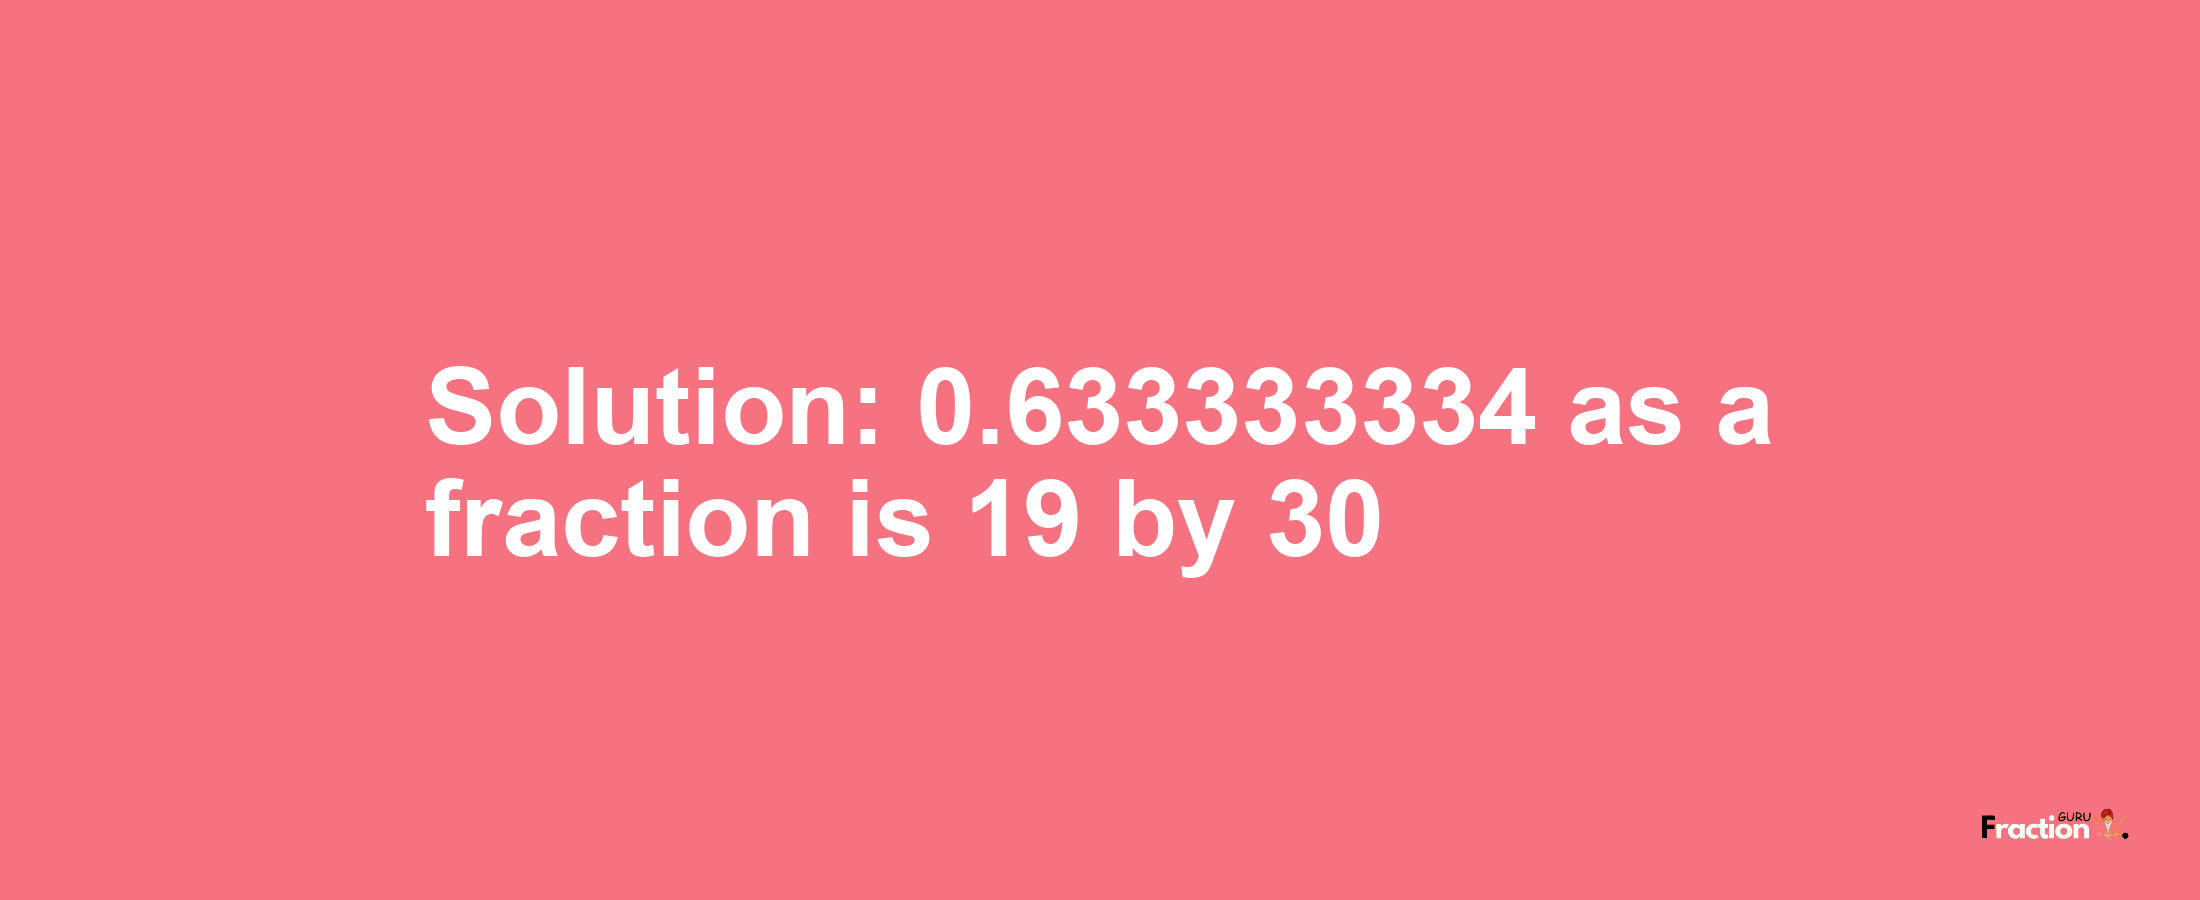 Solution:0.633333334 as a fraction is 19/30